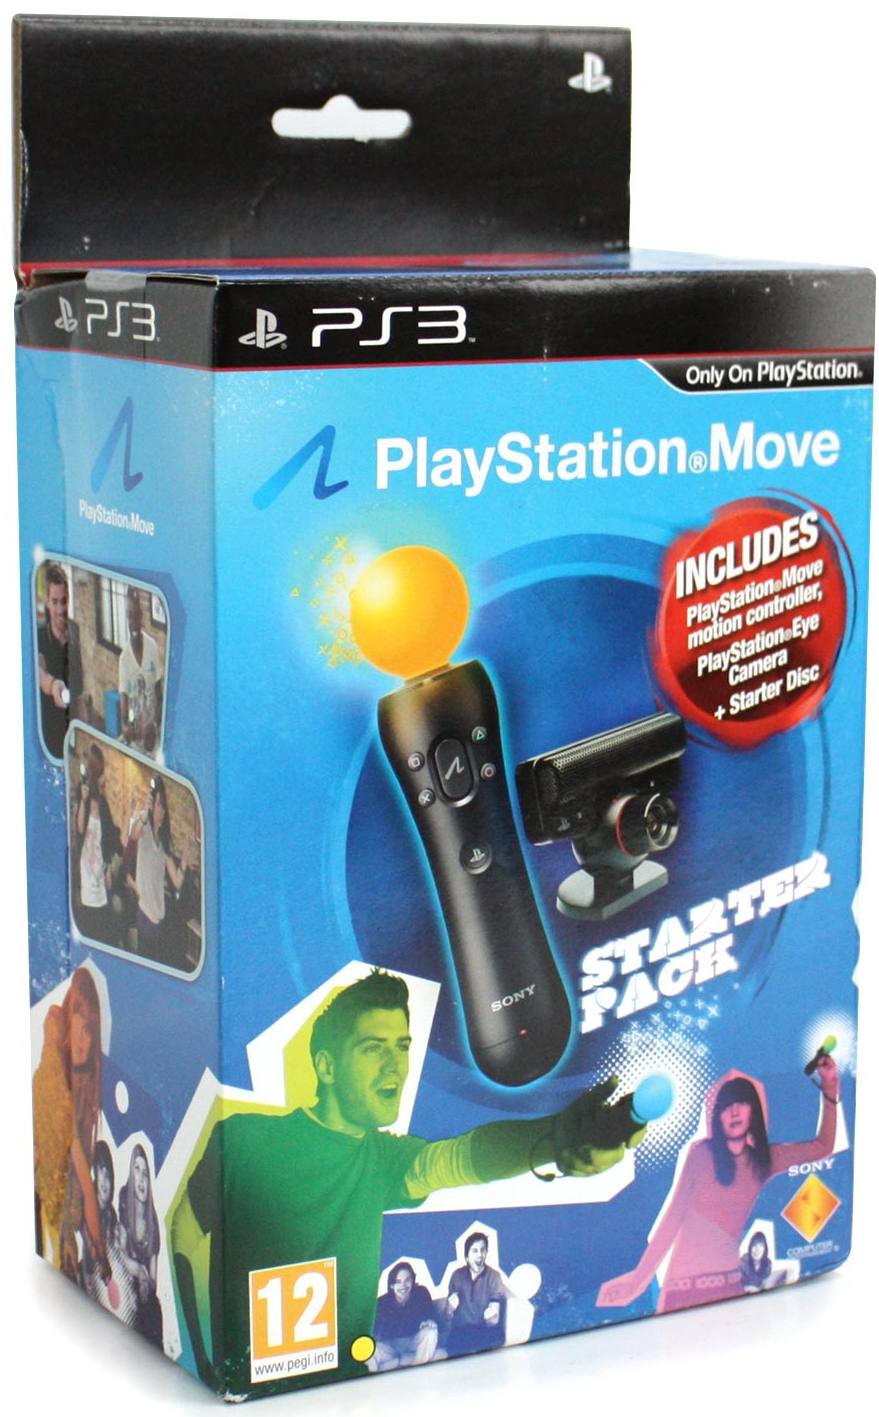 PlayStation Move Starter Pack Controller Camera with Disc) for PlayStation